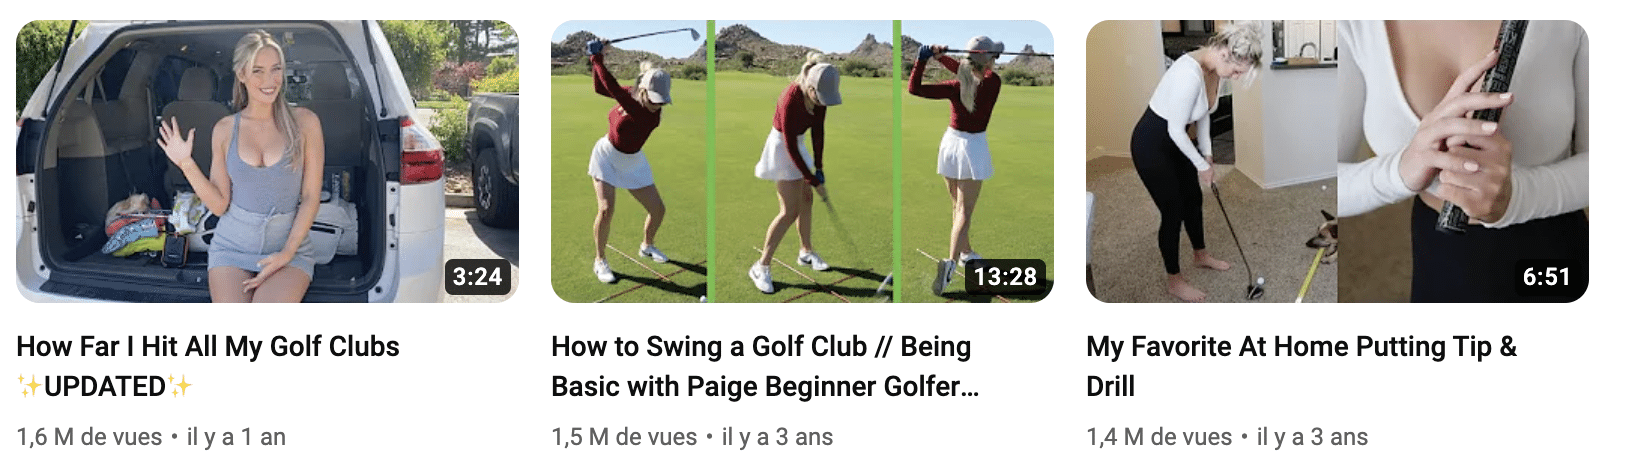 A series of videos showing a woman playing golf.